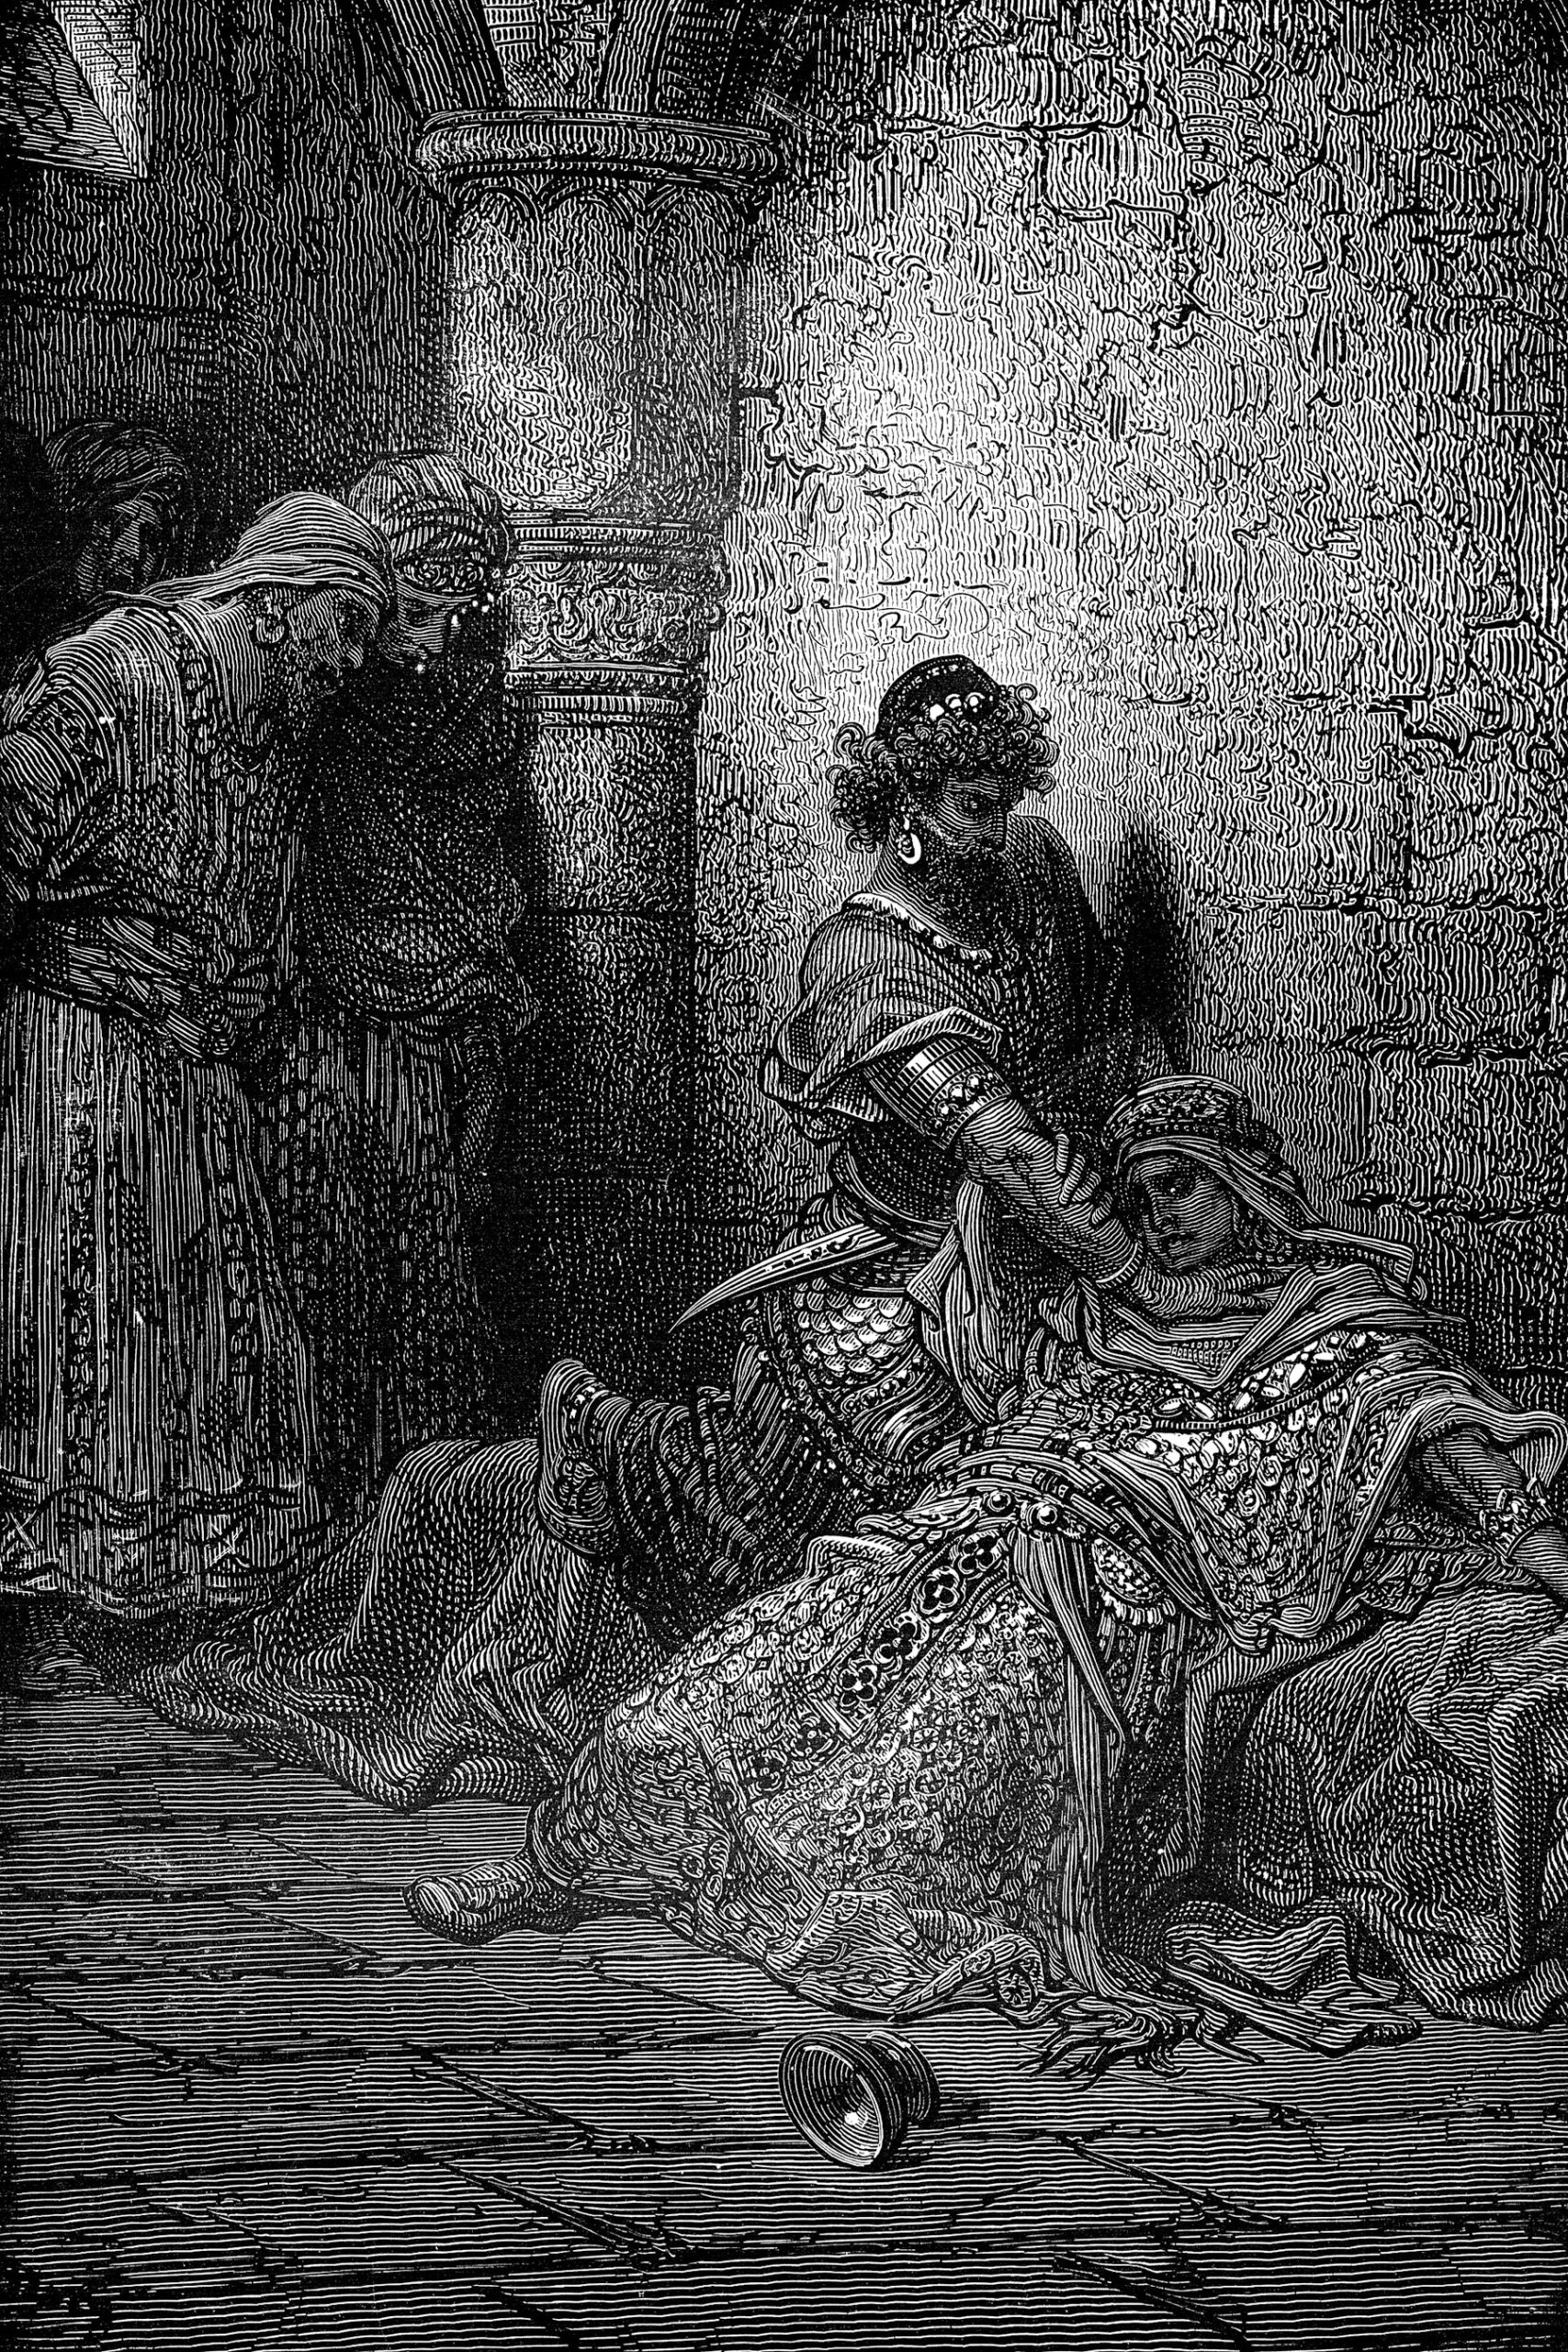 Alexius IV is murdered following a palace coup by Alexius V. When Alexius V also refused to pay the debt, the Latin crusaders sacked the city and crowned Baldwin of Flanders-Hainault as the first Latin emperor of Constantinople. 